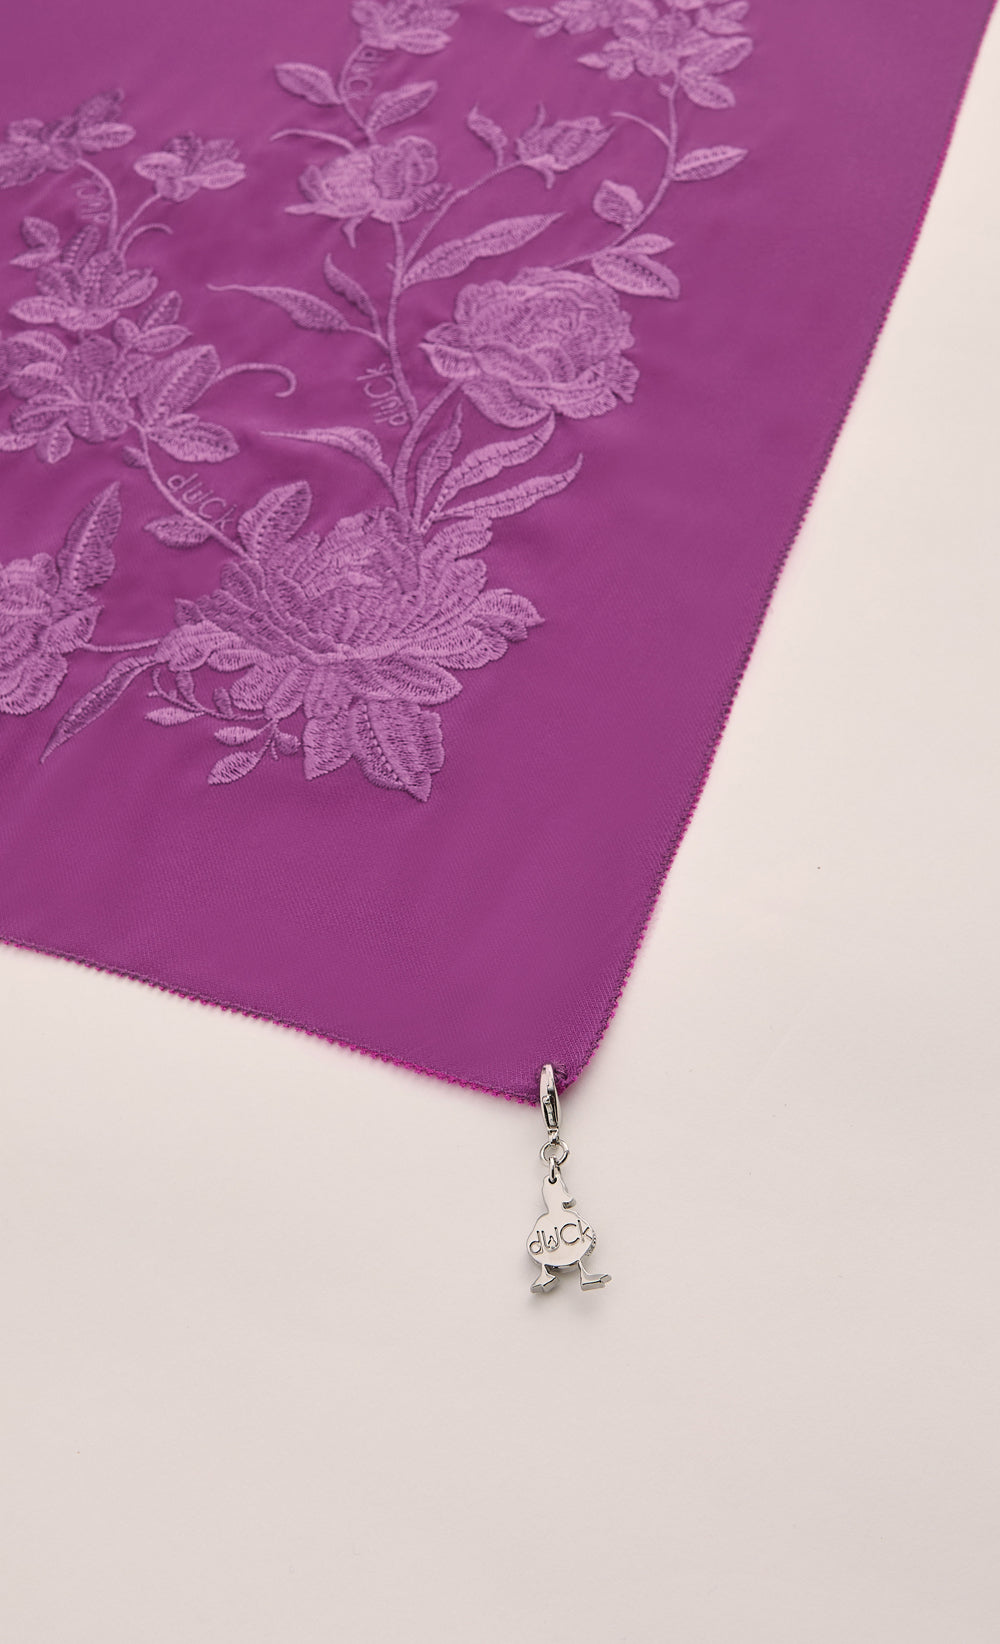 The Peonies Embroidery dUCk Shawl in Magenta